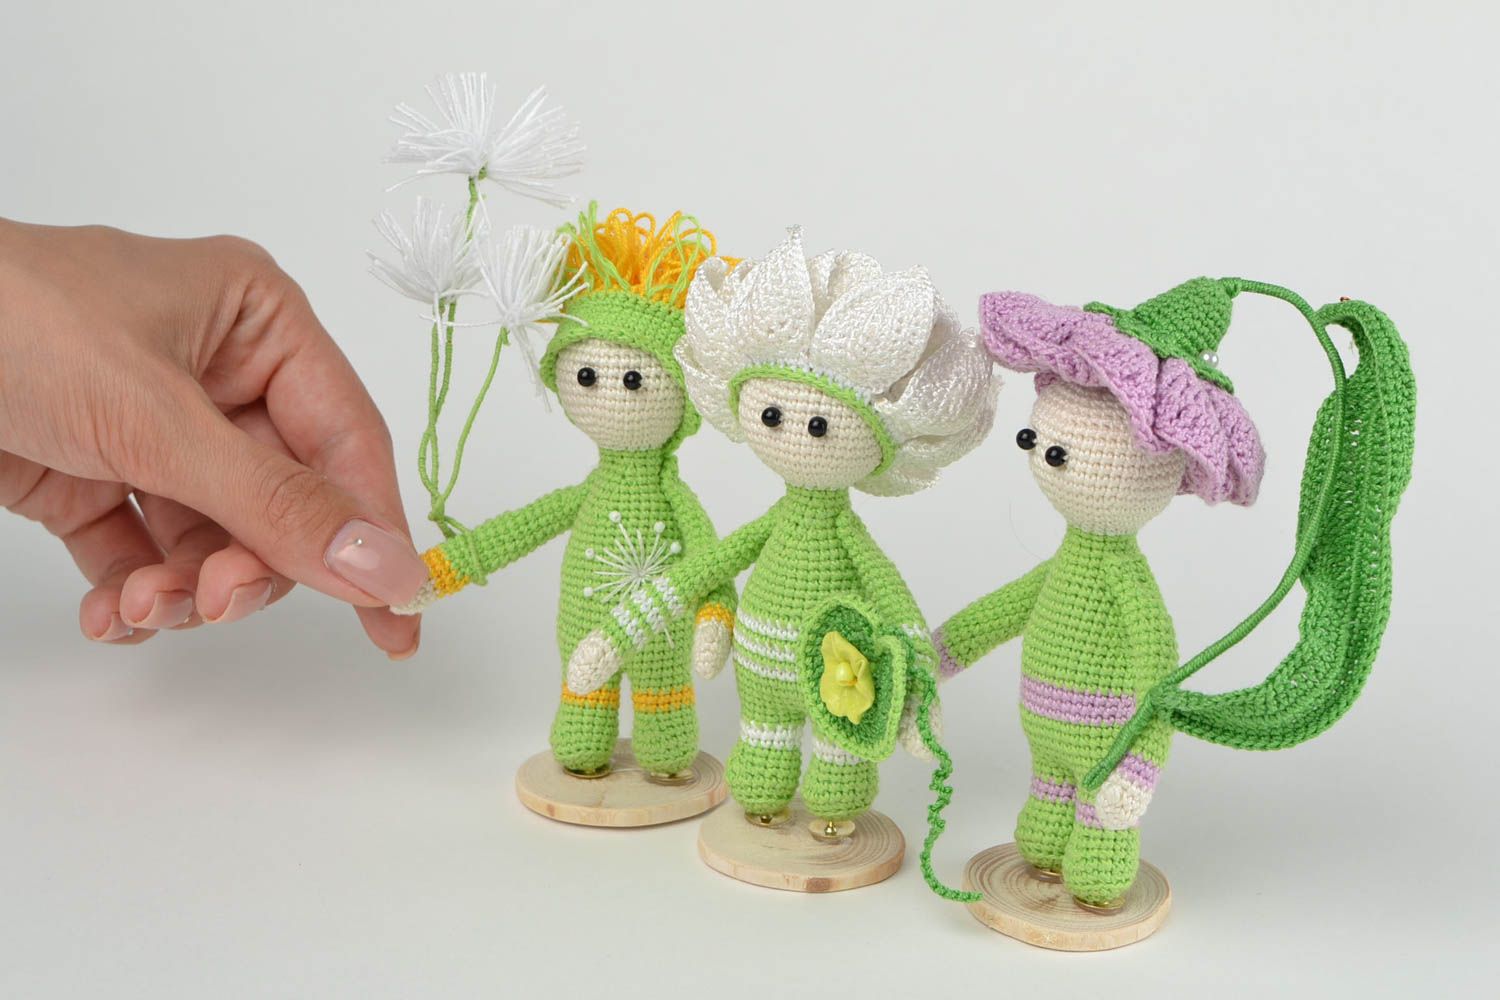 Handmade toy designer toy soft toy set of 3 items crochet toy gift for baby photo 2